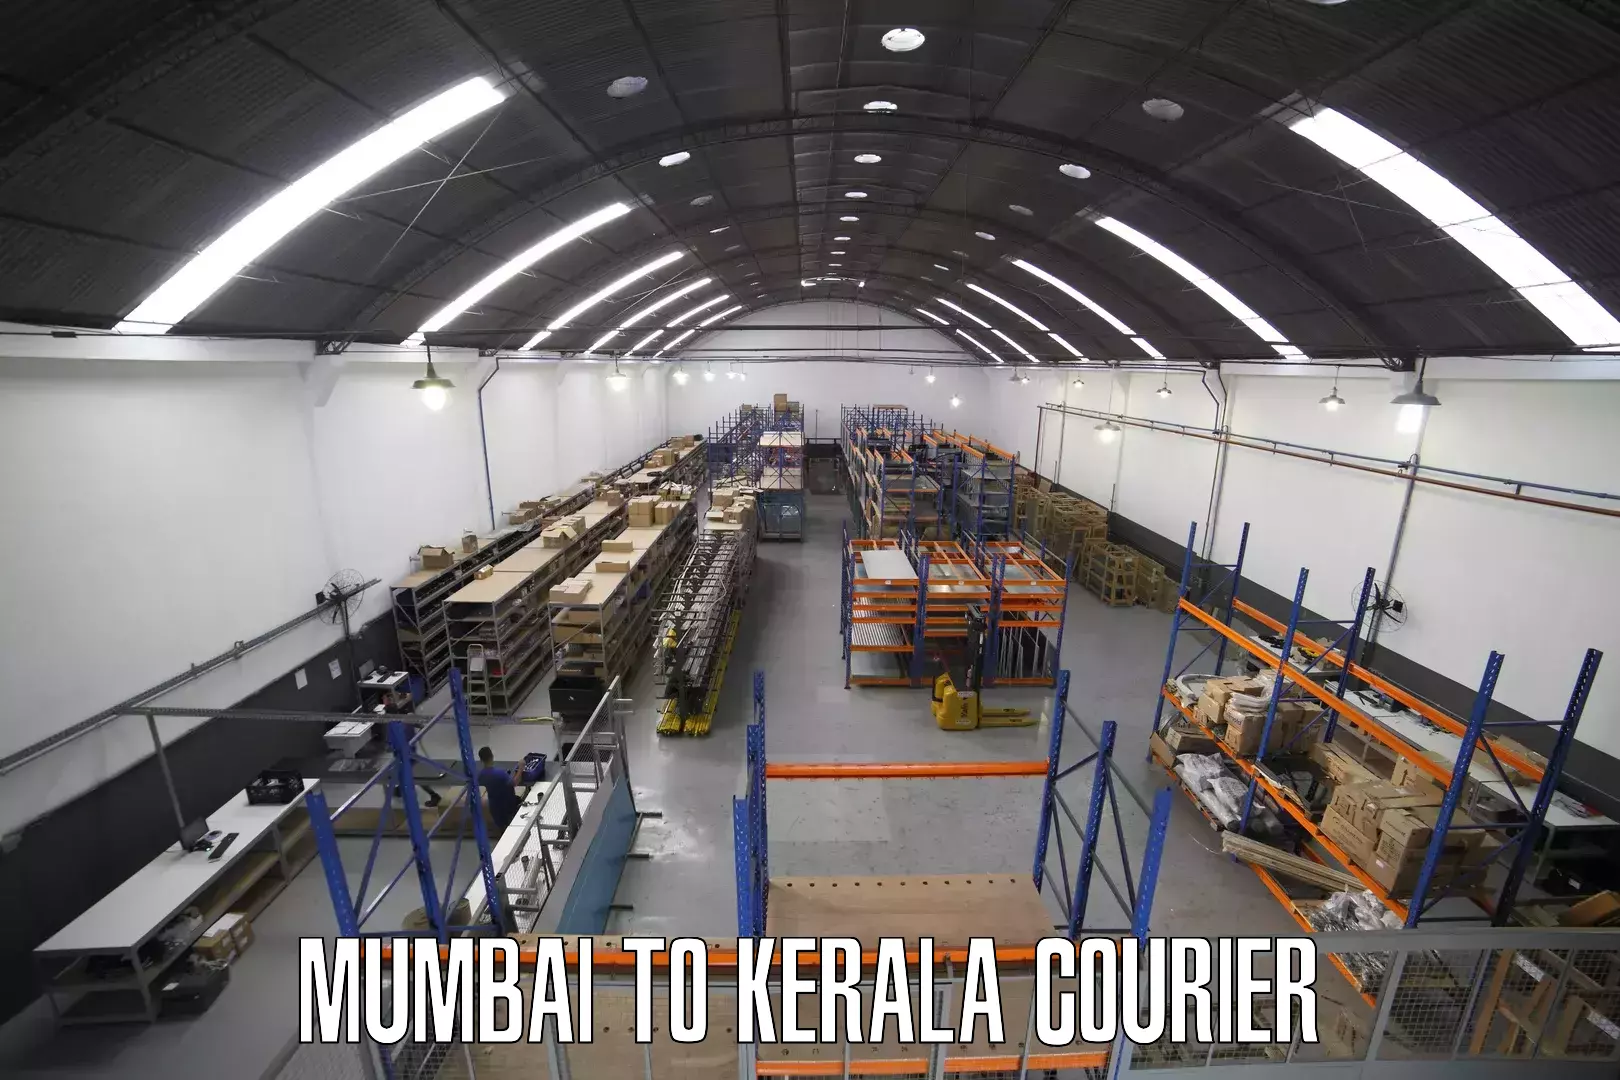 Personal courier services Mumbai to Cochin University of Science and Technology